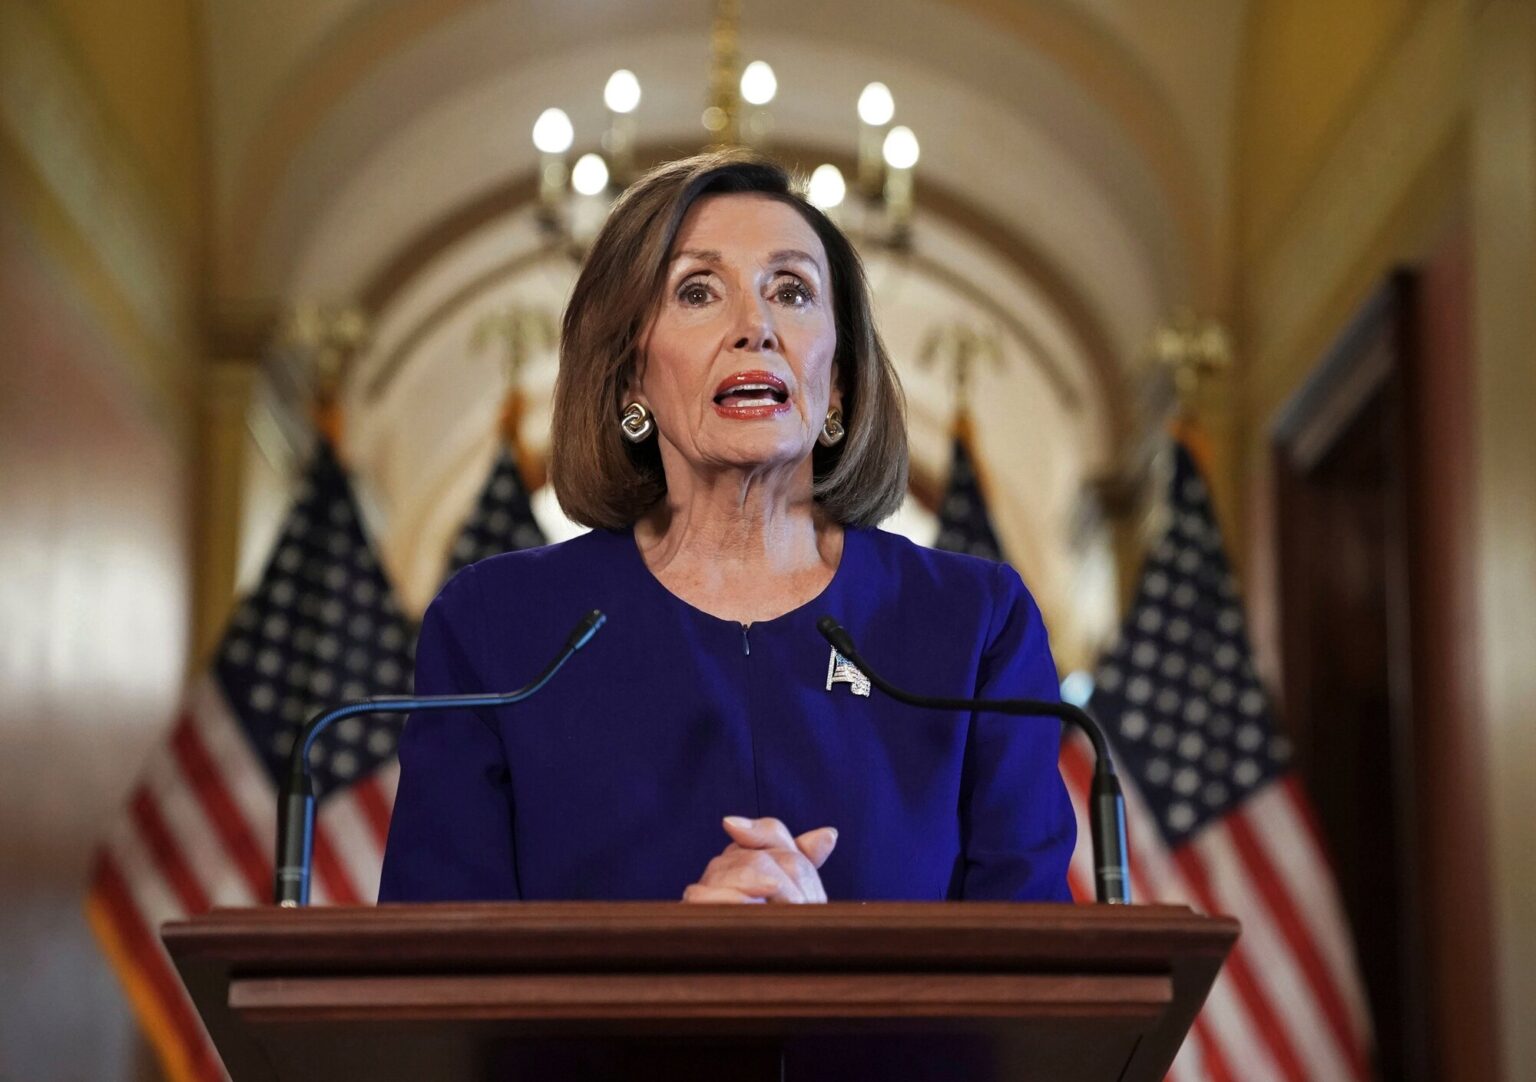 Nancy Pelosi has had quite a long career in politics these past decades, so what does her net worth look like? Find out just how much money she earns here.